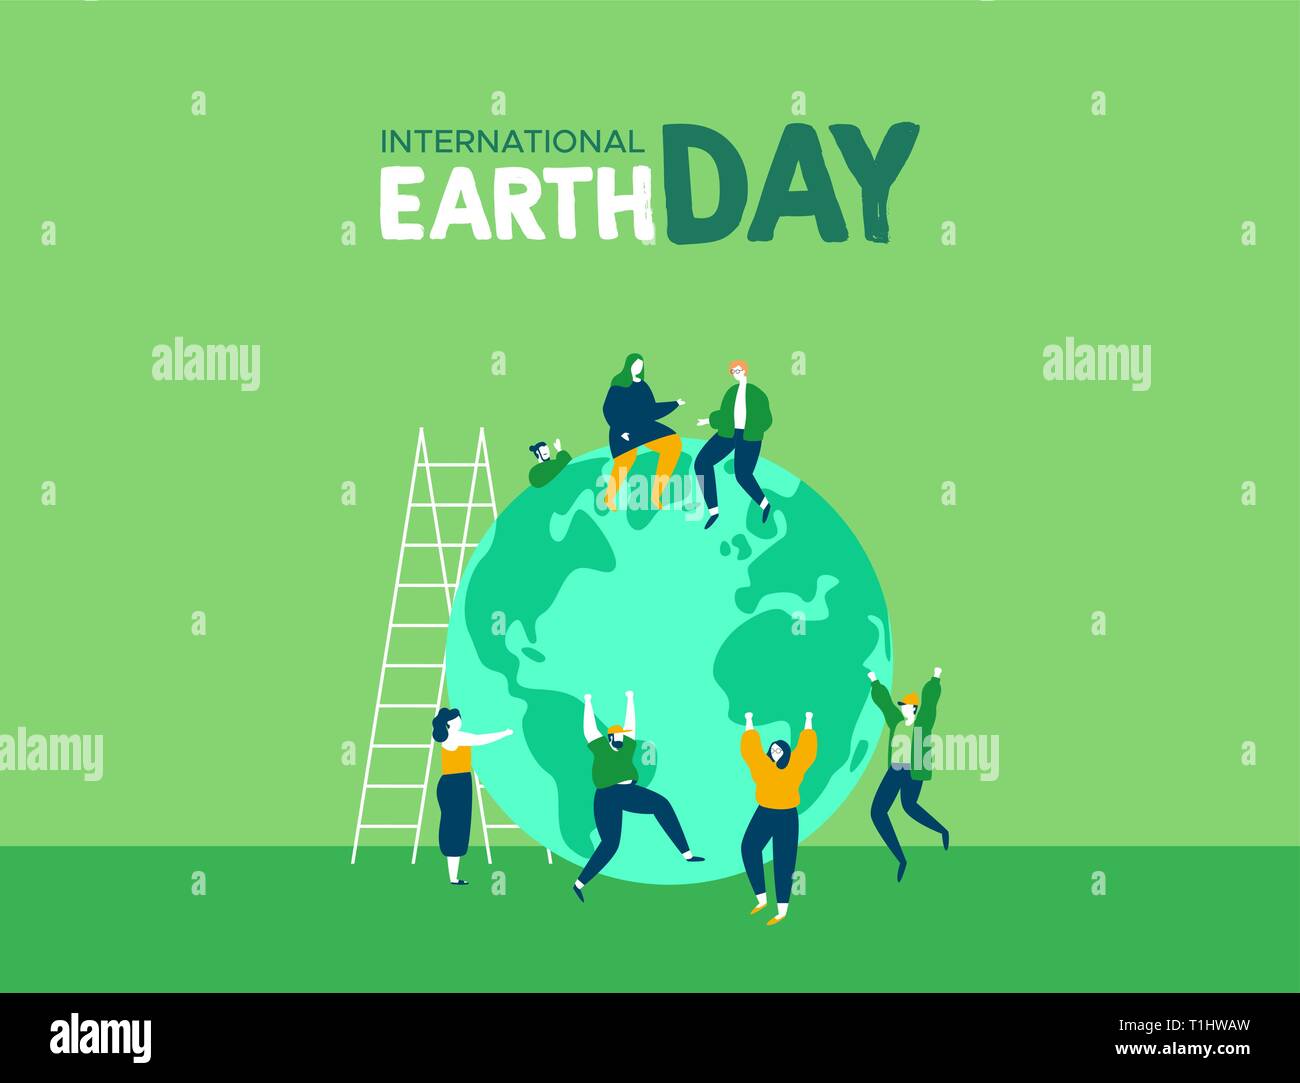 International Earth Day illustration of young people friend group celebrating. World environment and nature care concept for social support. Stock Vector